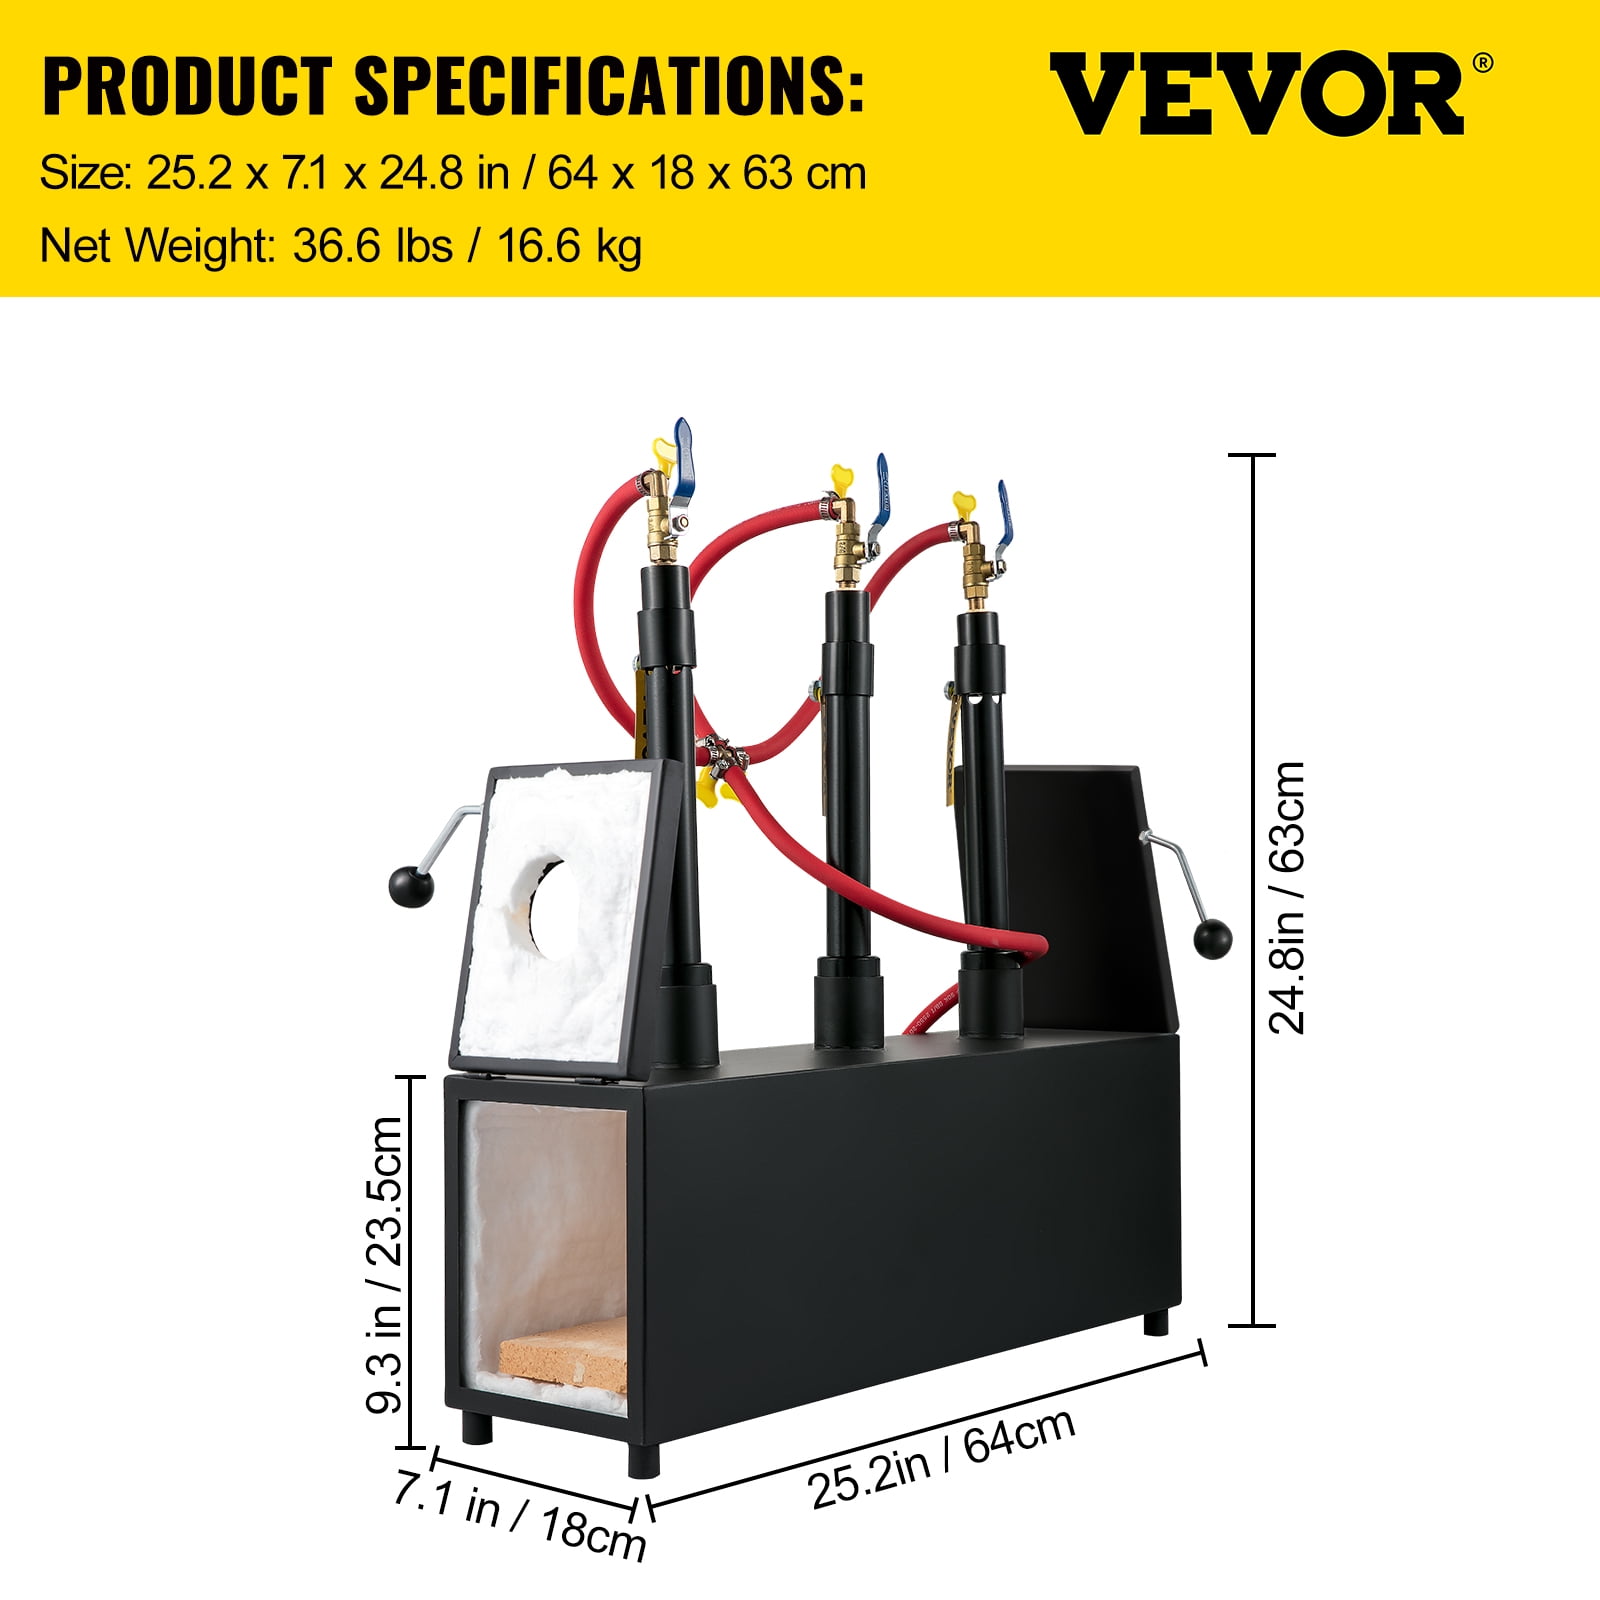 VEVOR Propane Forge Portable, Triple Burner Tool and Knife Making, Large  Capacity Blacksmith Farrier Forges, Mini Furnace Blacksmithing, Stainless  Steel Gas Forging Tools and Equipment, Oval